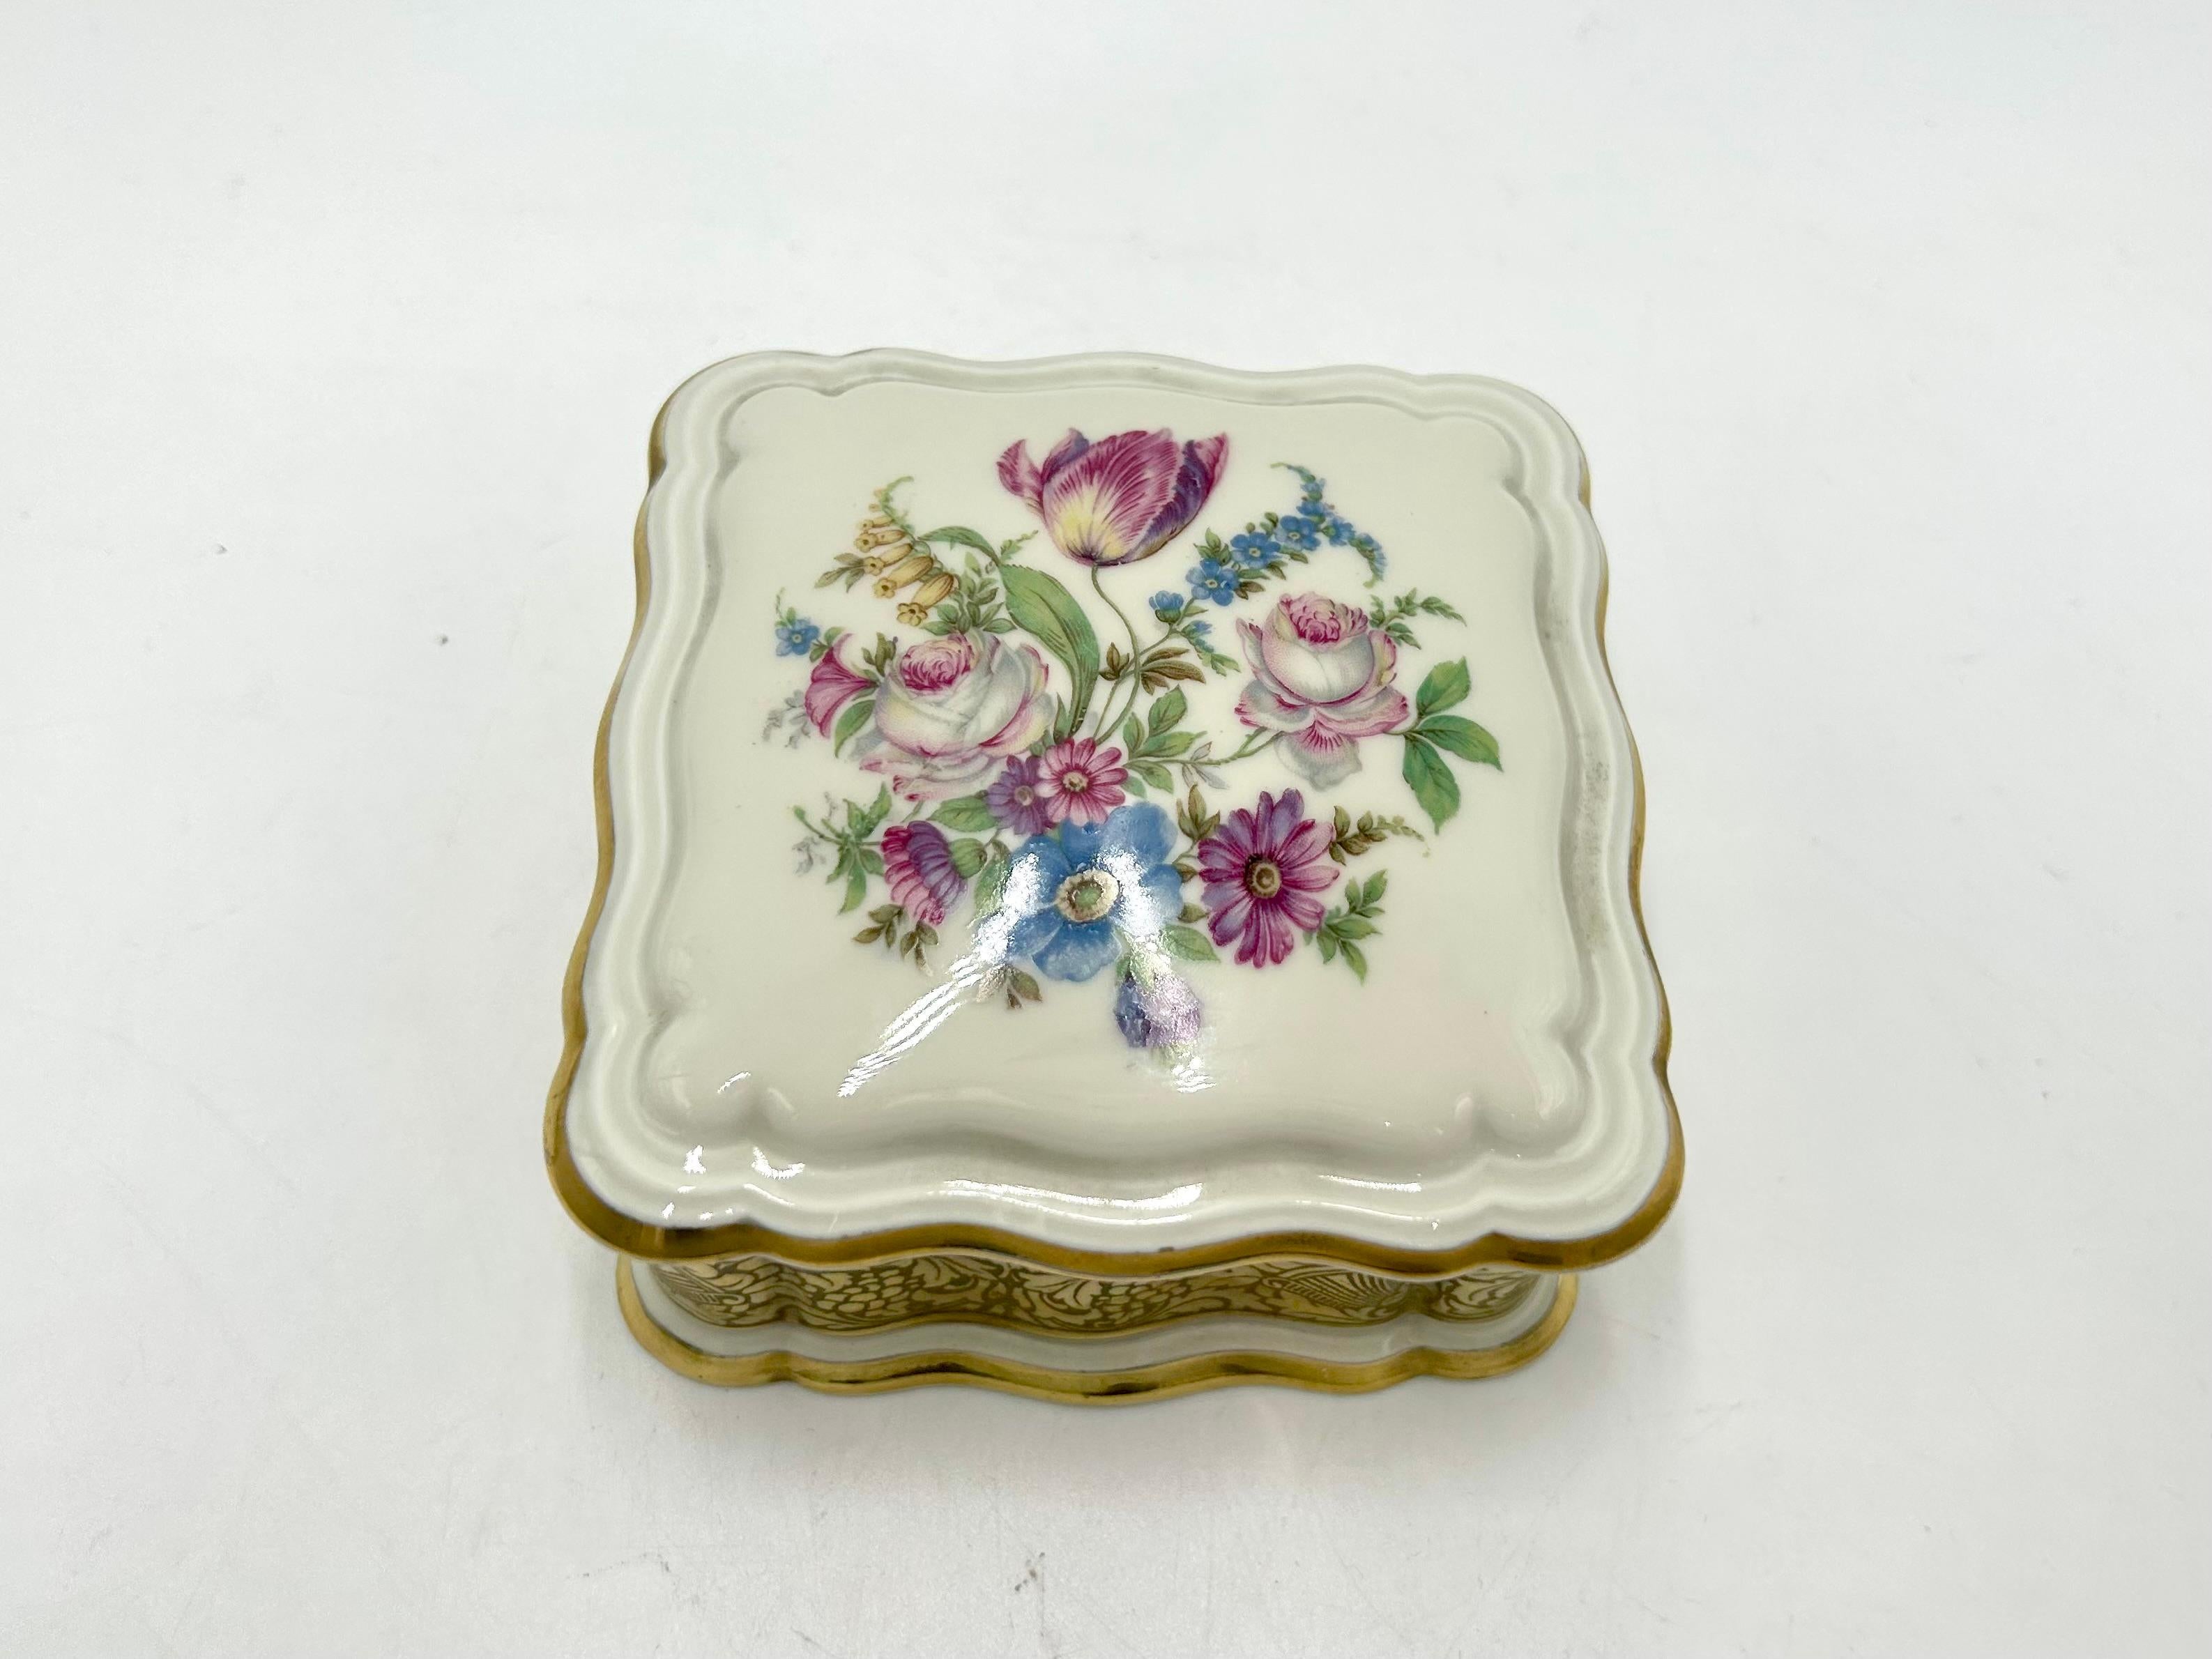 Porcelain casket - a box for jewelry and trinkets. Ivory-colored porcelain decorated with gilding and a floral bouquet motif. A product of the renowned German manufacturer Rosenthal. Chippendale series. Signed with a mark from 1949.

Very good